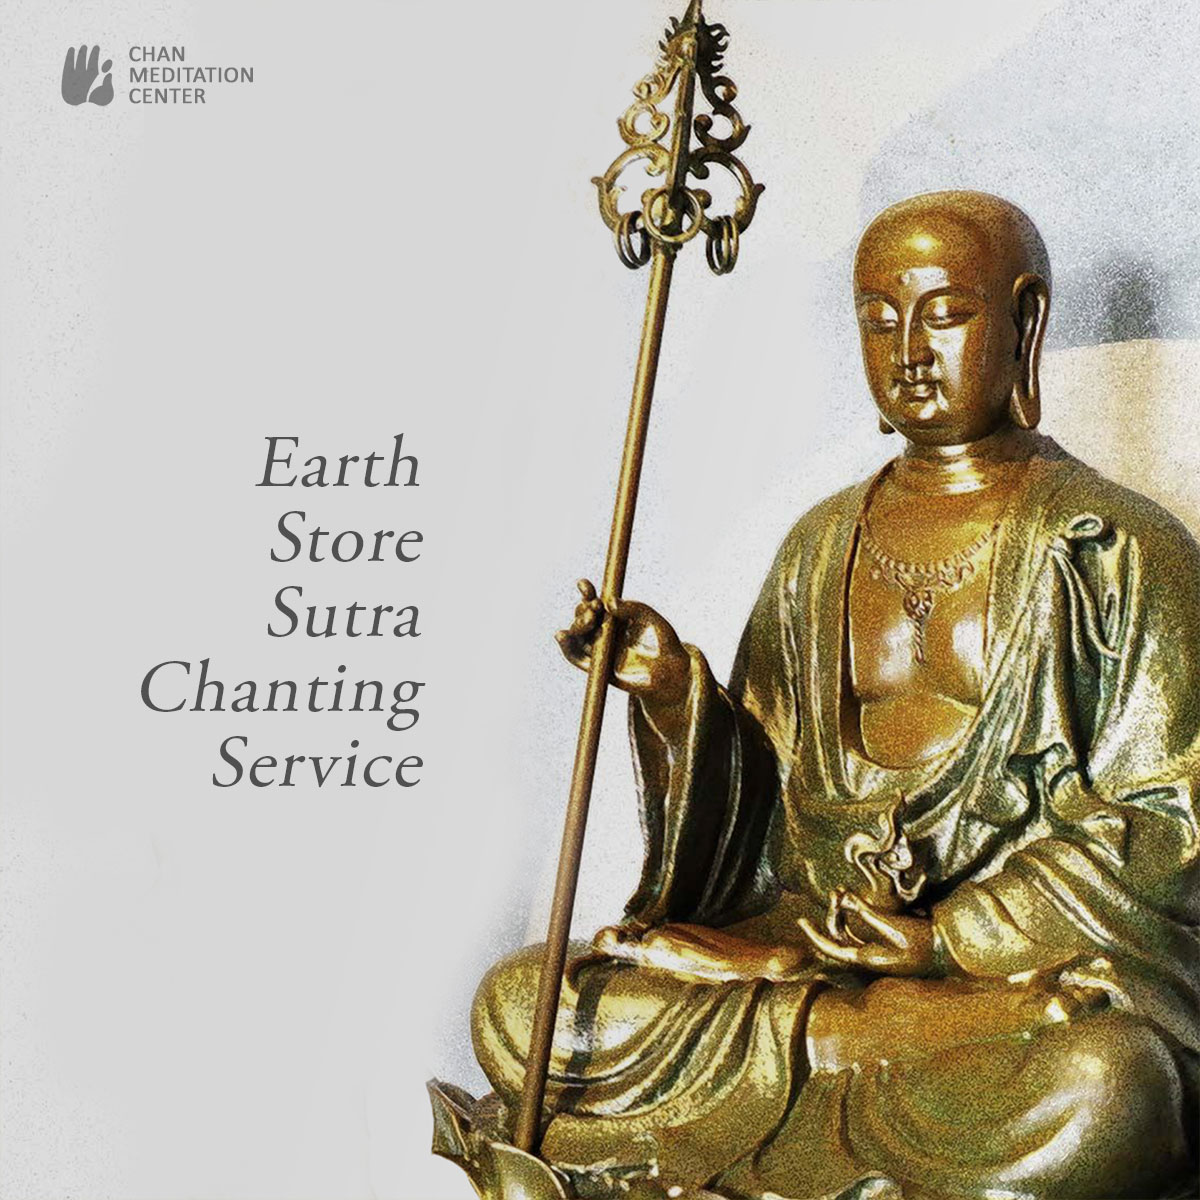 Earth Store Sutra Chanting Service